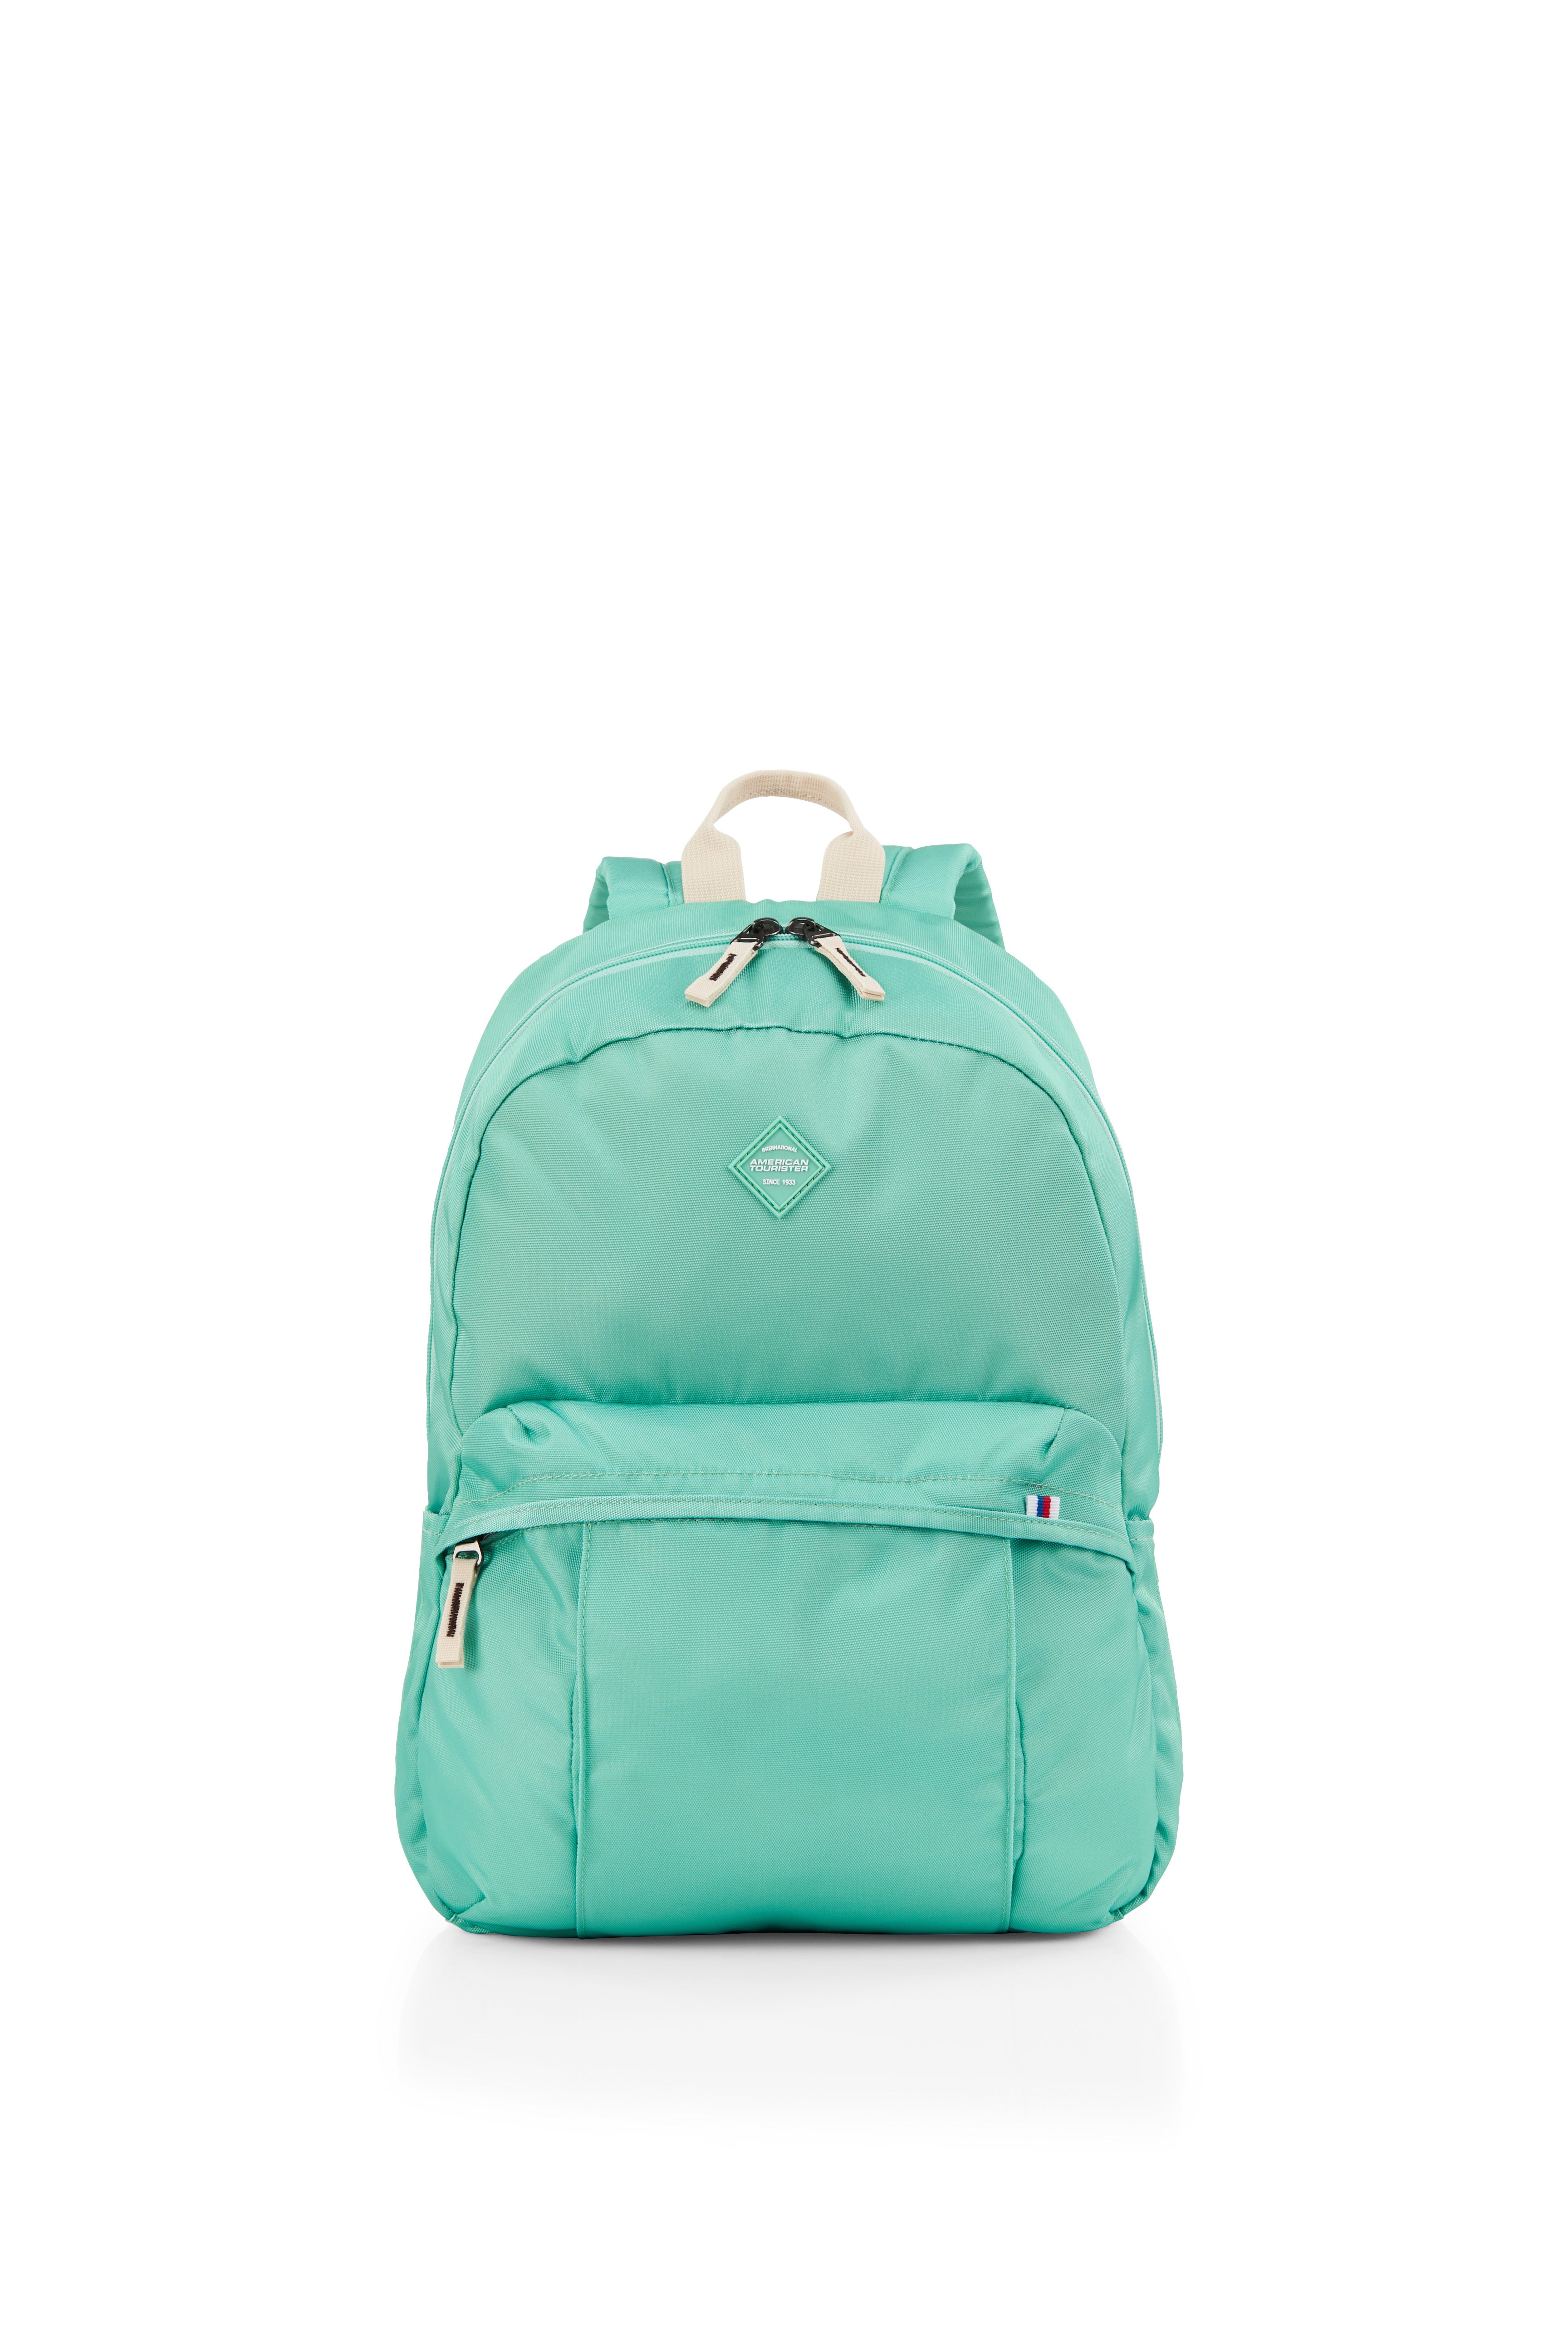 American Tourister - RUDY Small Fashion Backpack - Ice Mint - 0